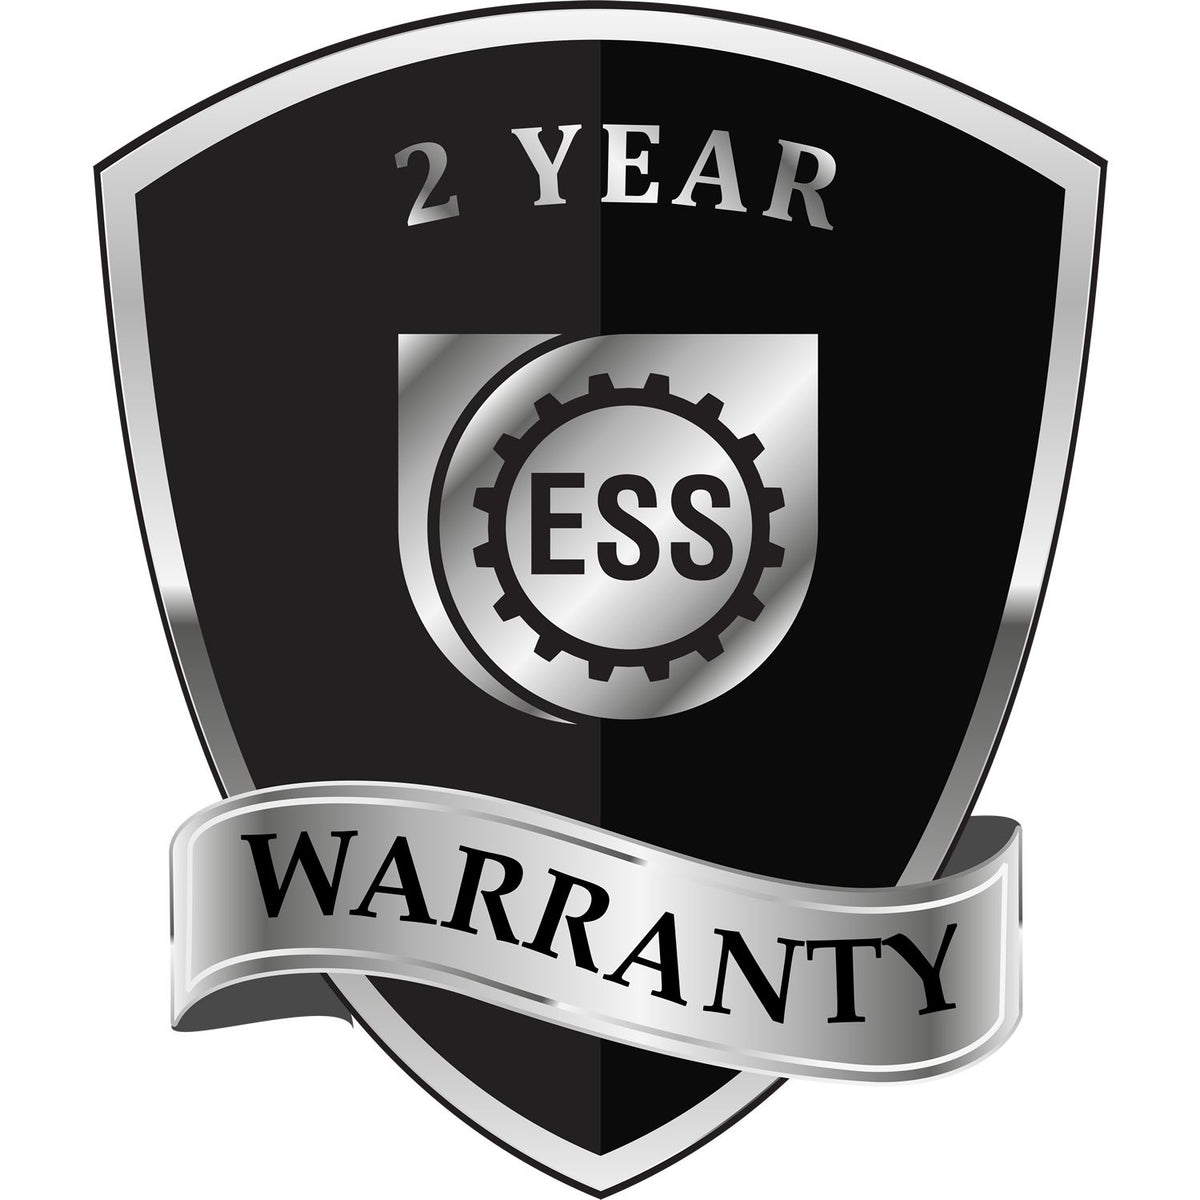 A black and silver badge or emblem showing warranty information for the State of Vermont Extended Long Reach Geologist Seal